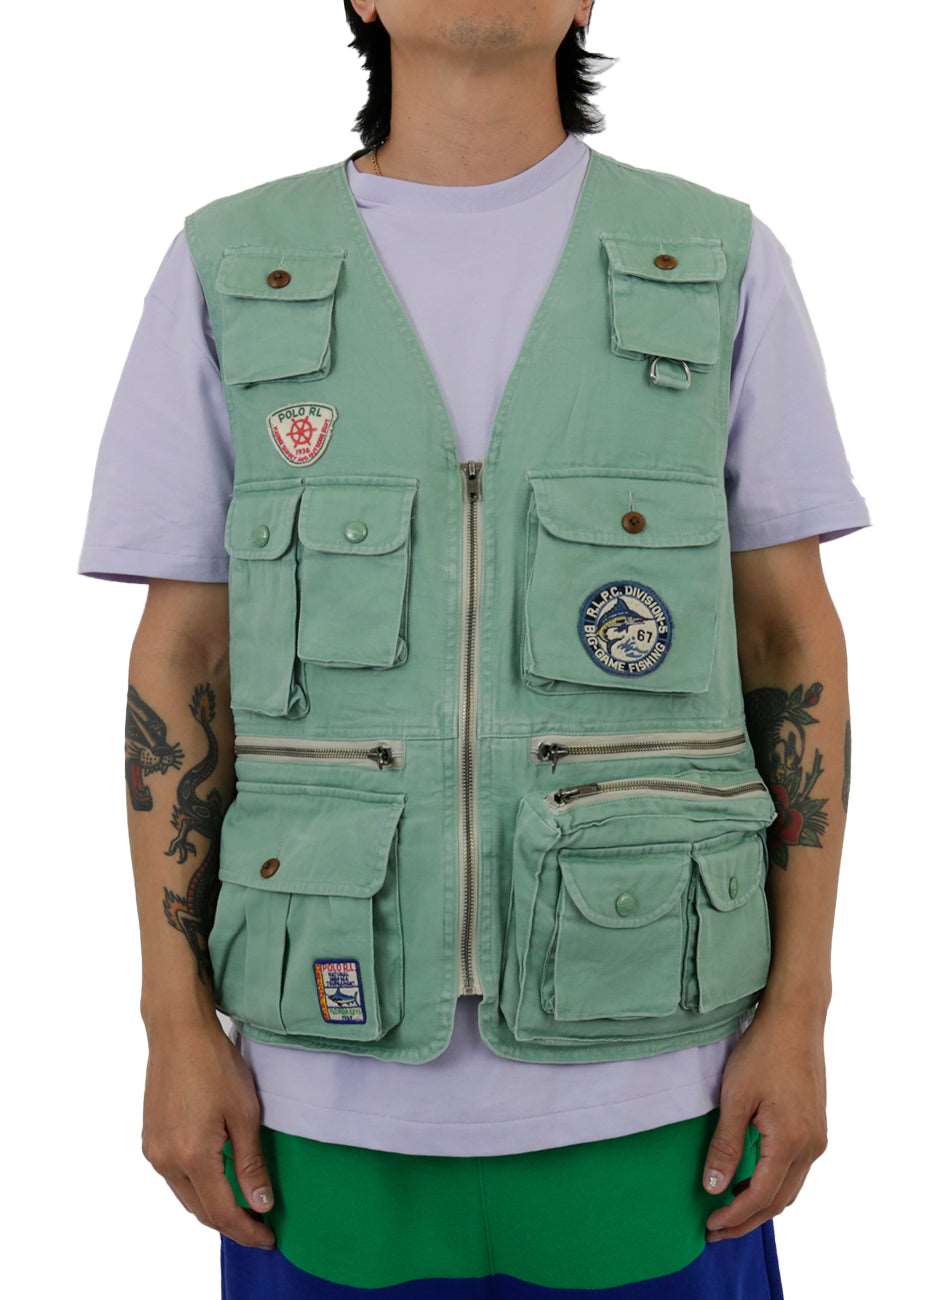 Heritage Chino Marlin Vest - Faded Mint